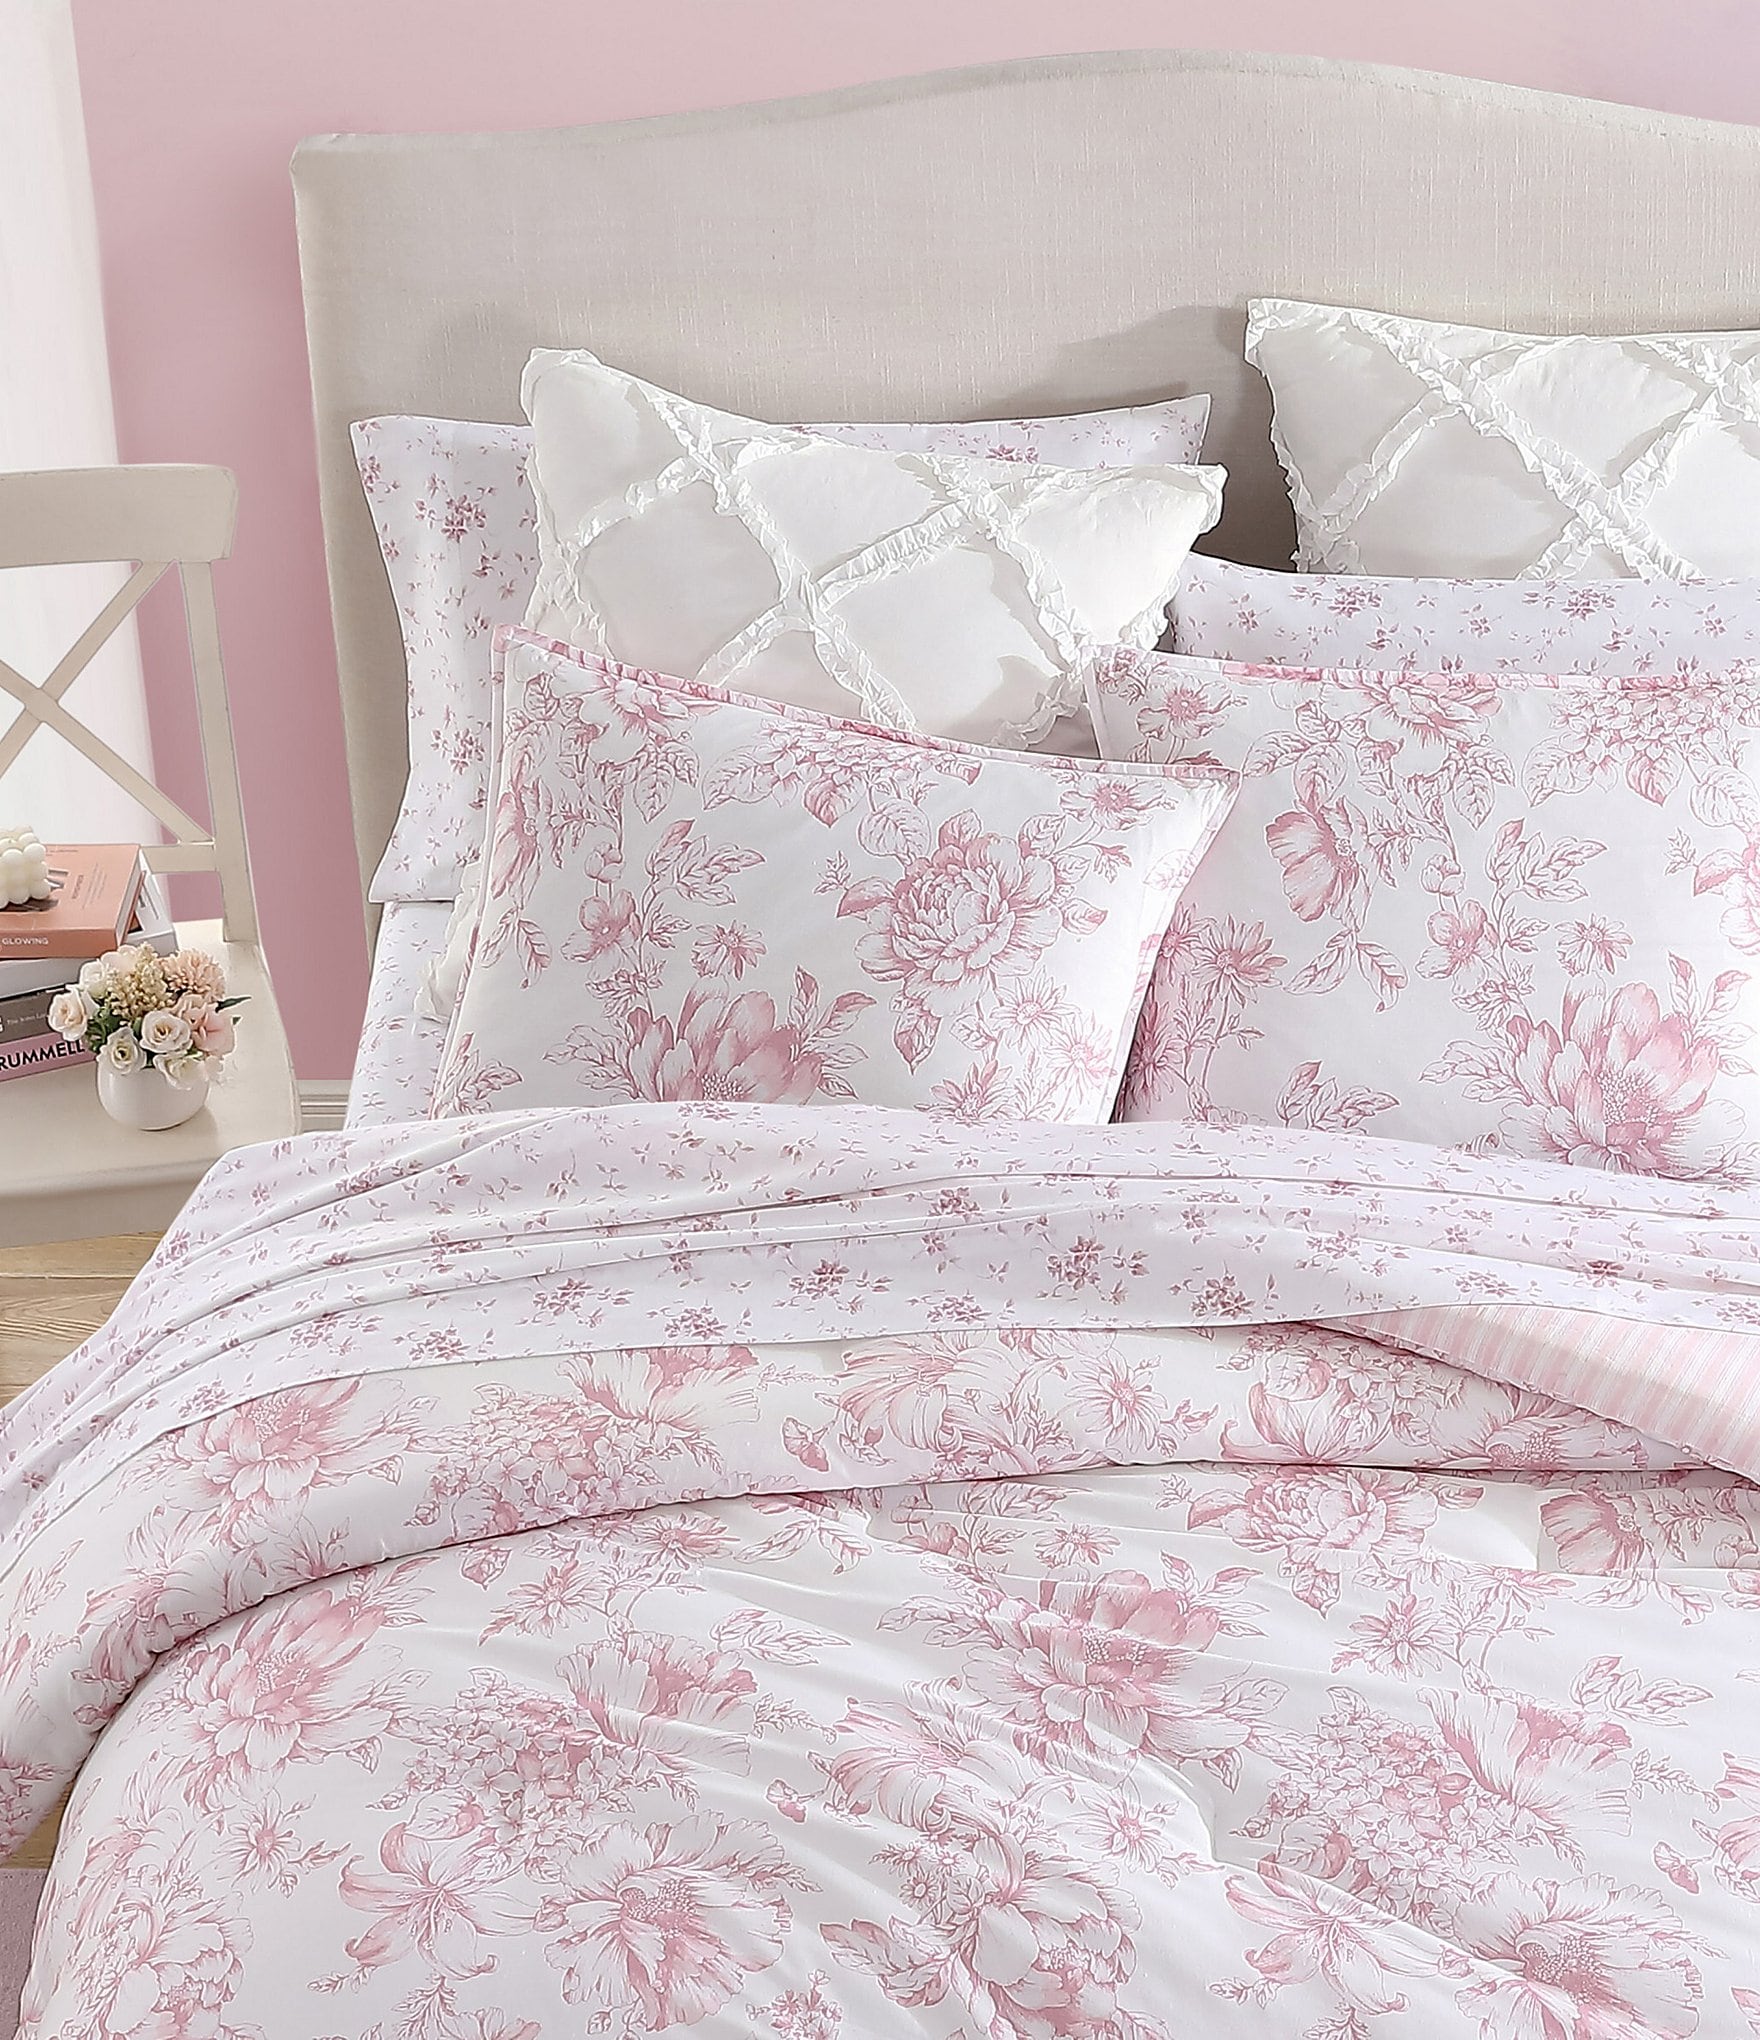 floral bedding: Bedding & Bedding Collections